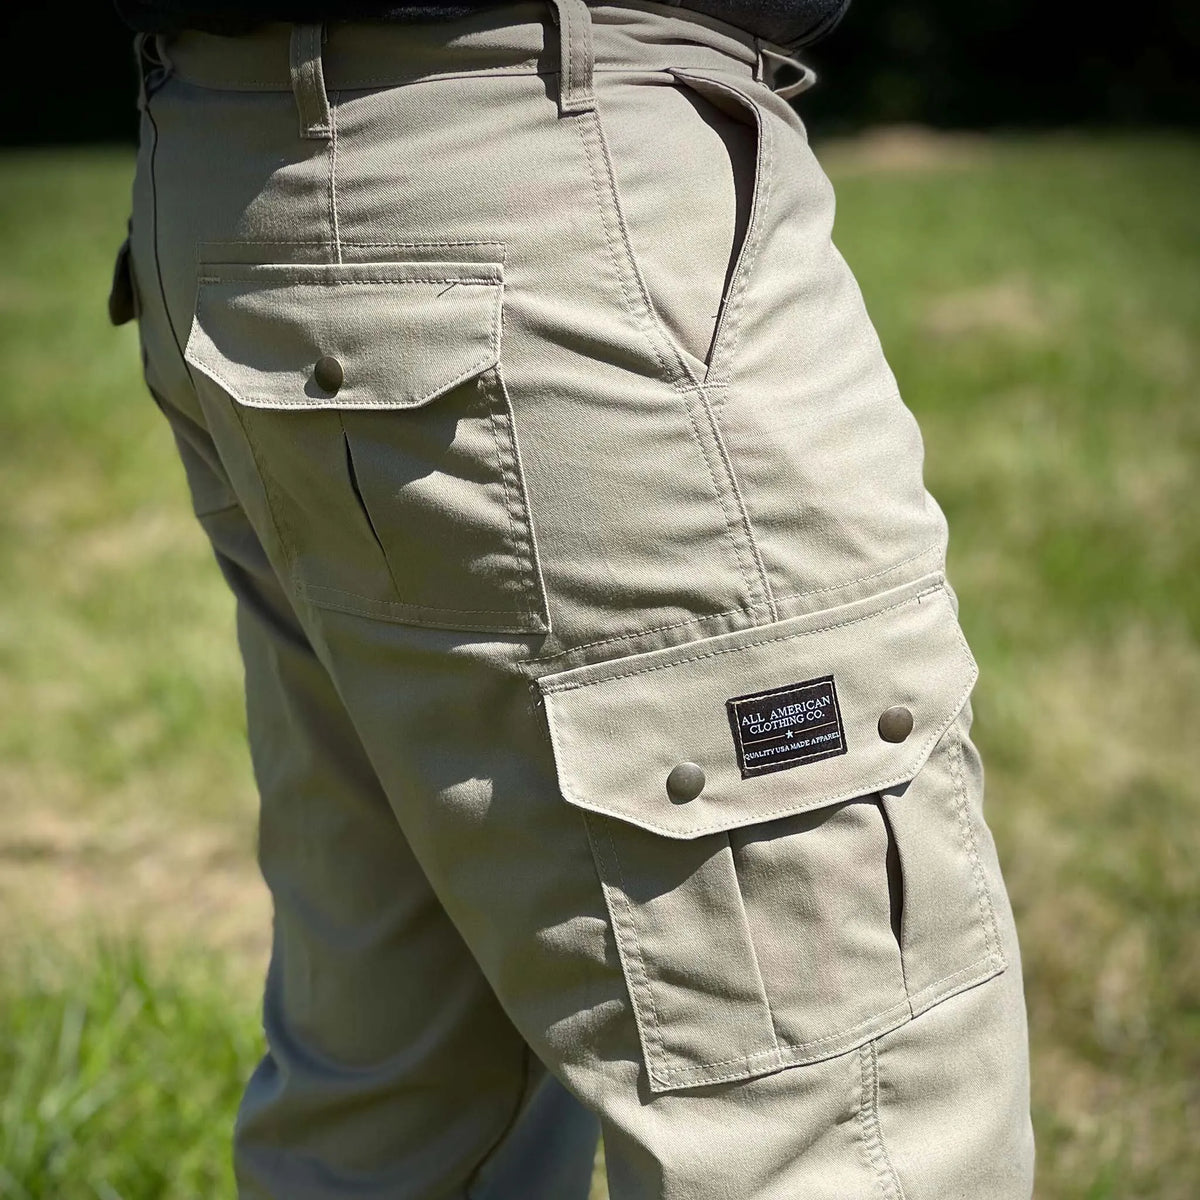 AA Cargo Pants | All American Clothing - All American Clothing Co